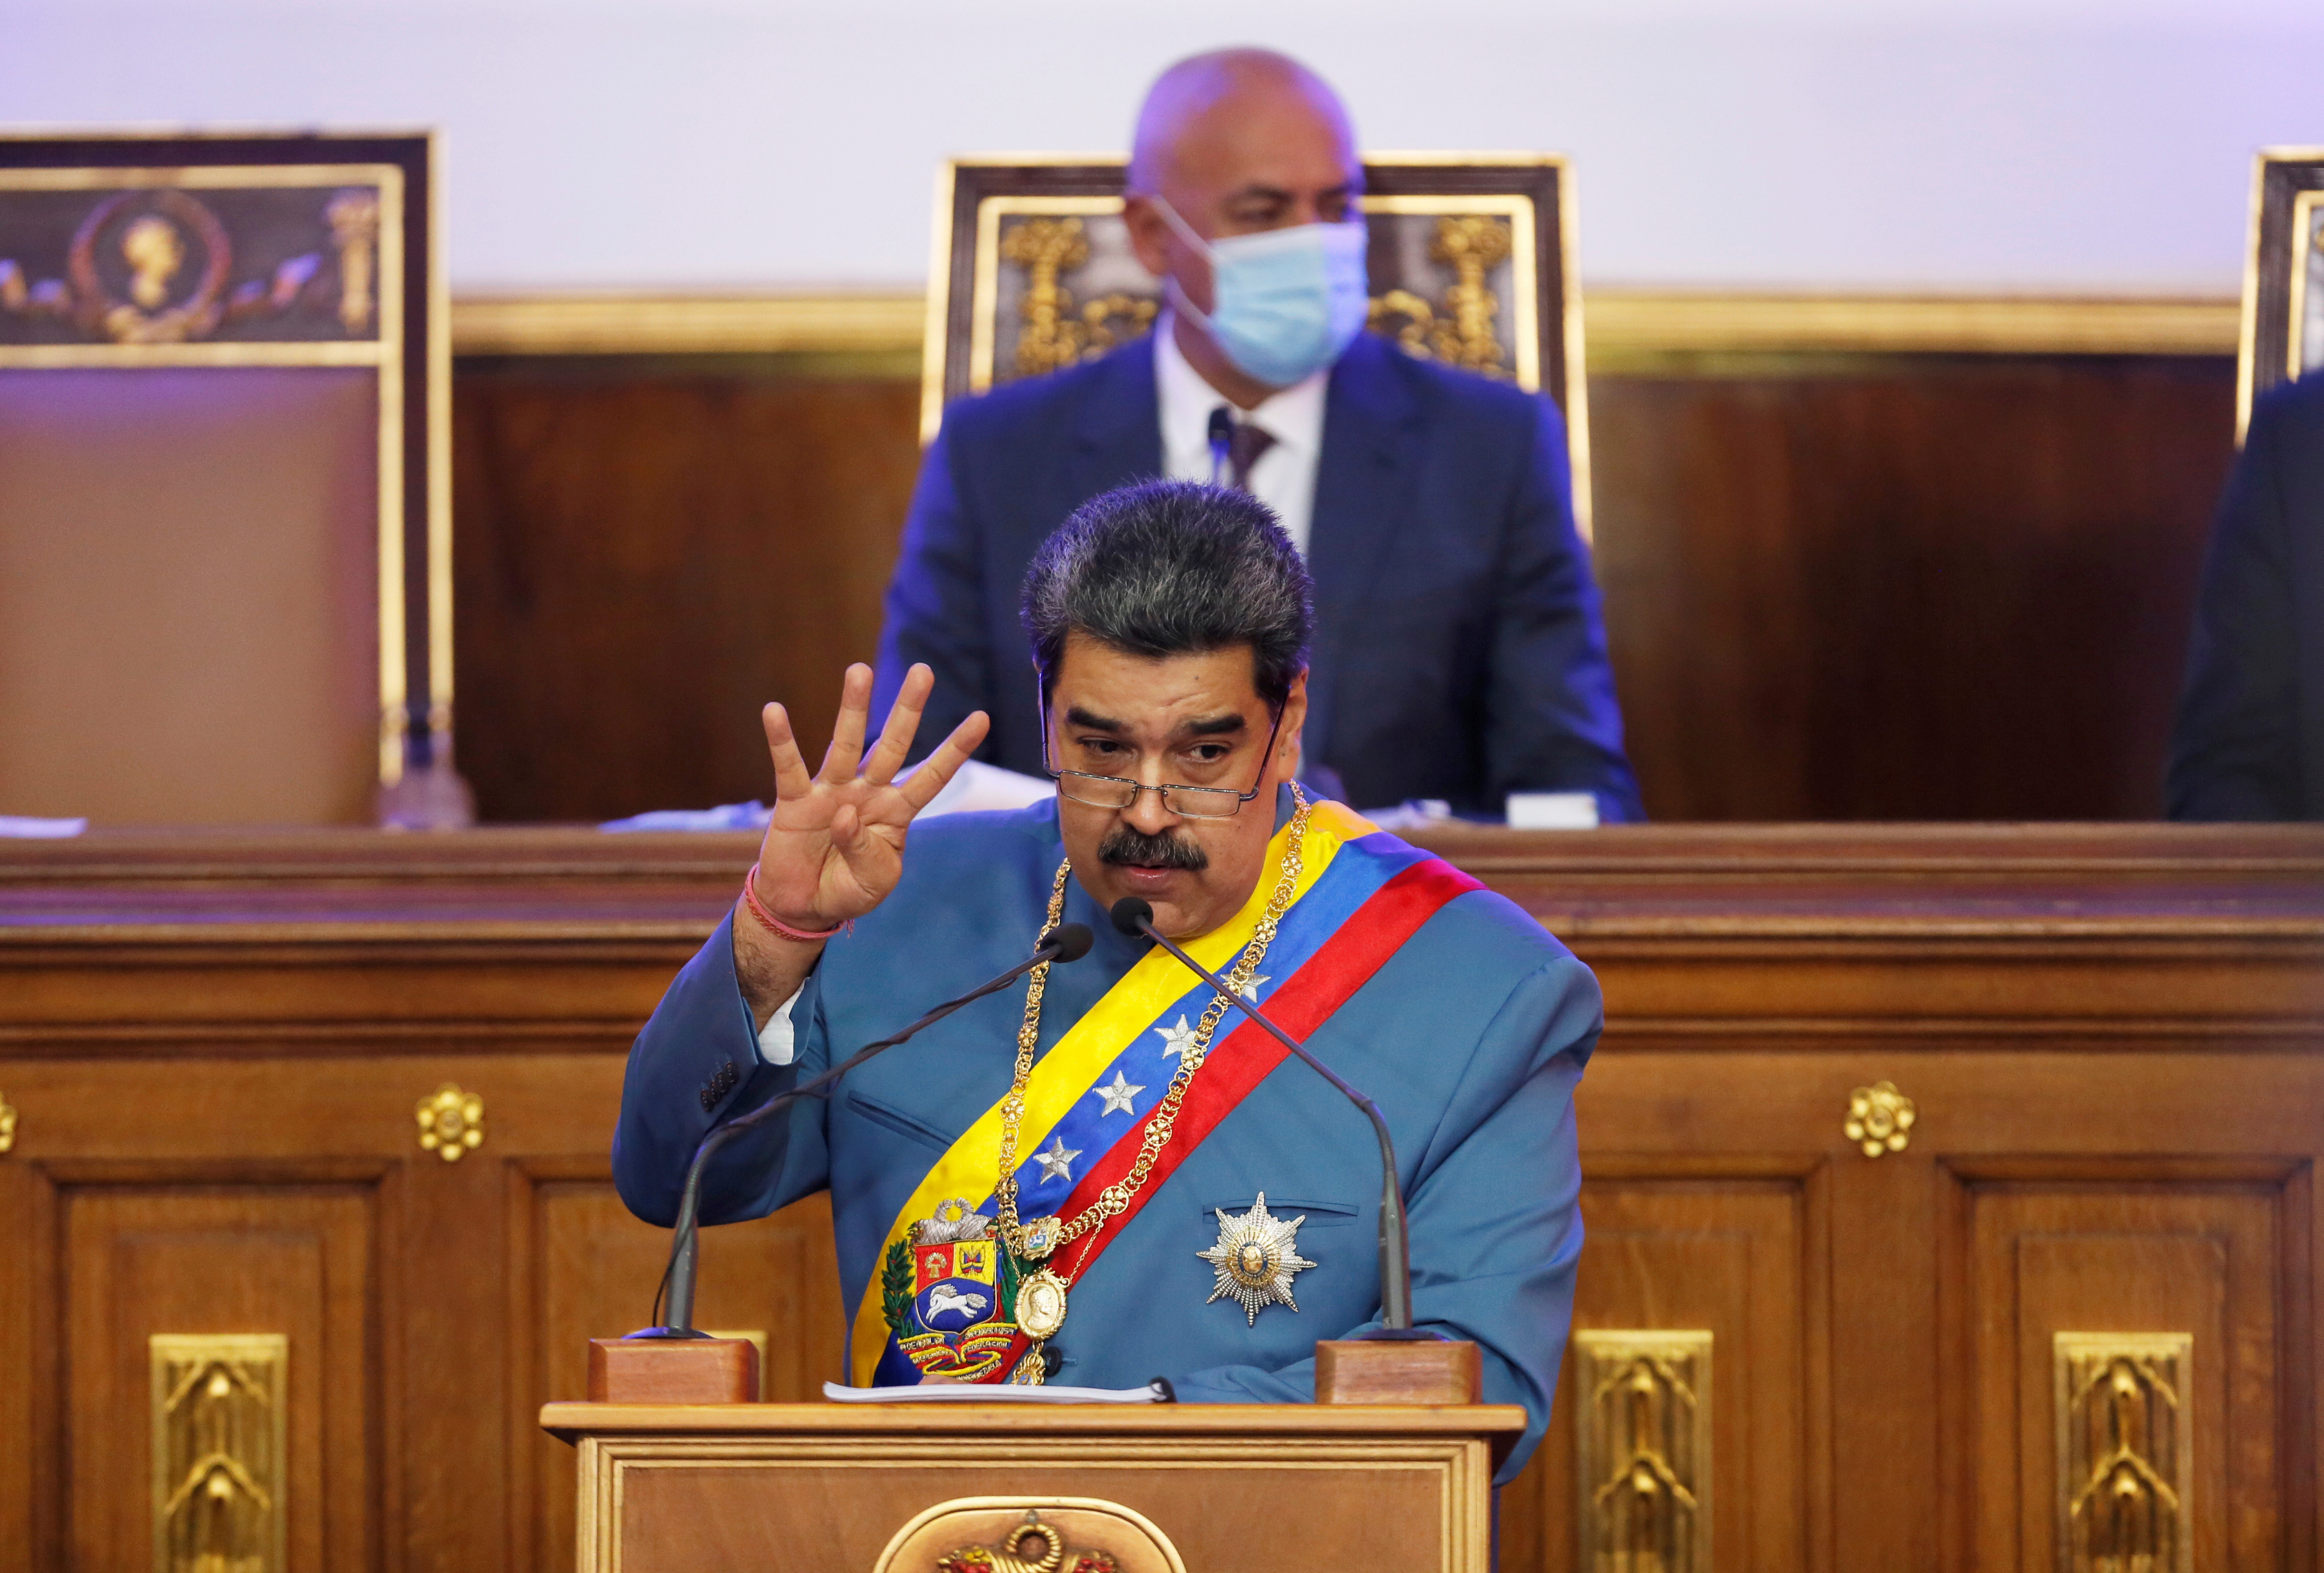 Venezuela's President Nicolas Maduro delivers his annual state of the nation speech during a special session of the National Constituent Assembly, in Caracas